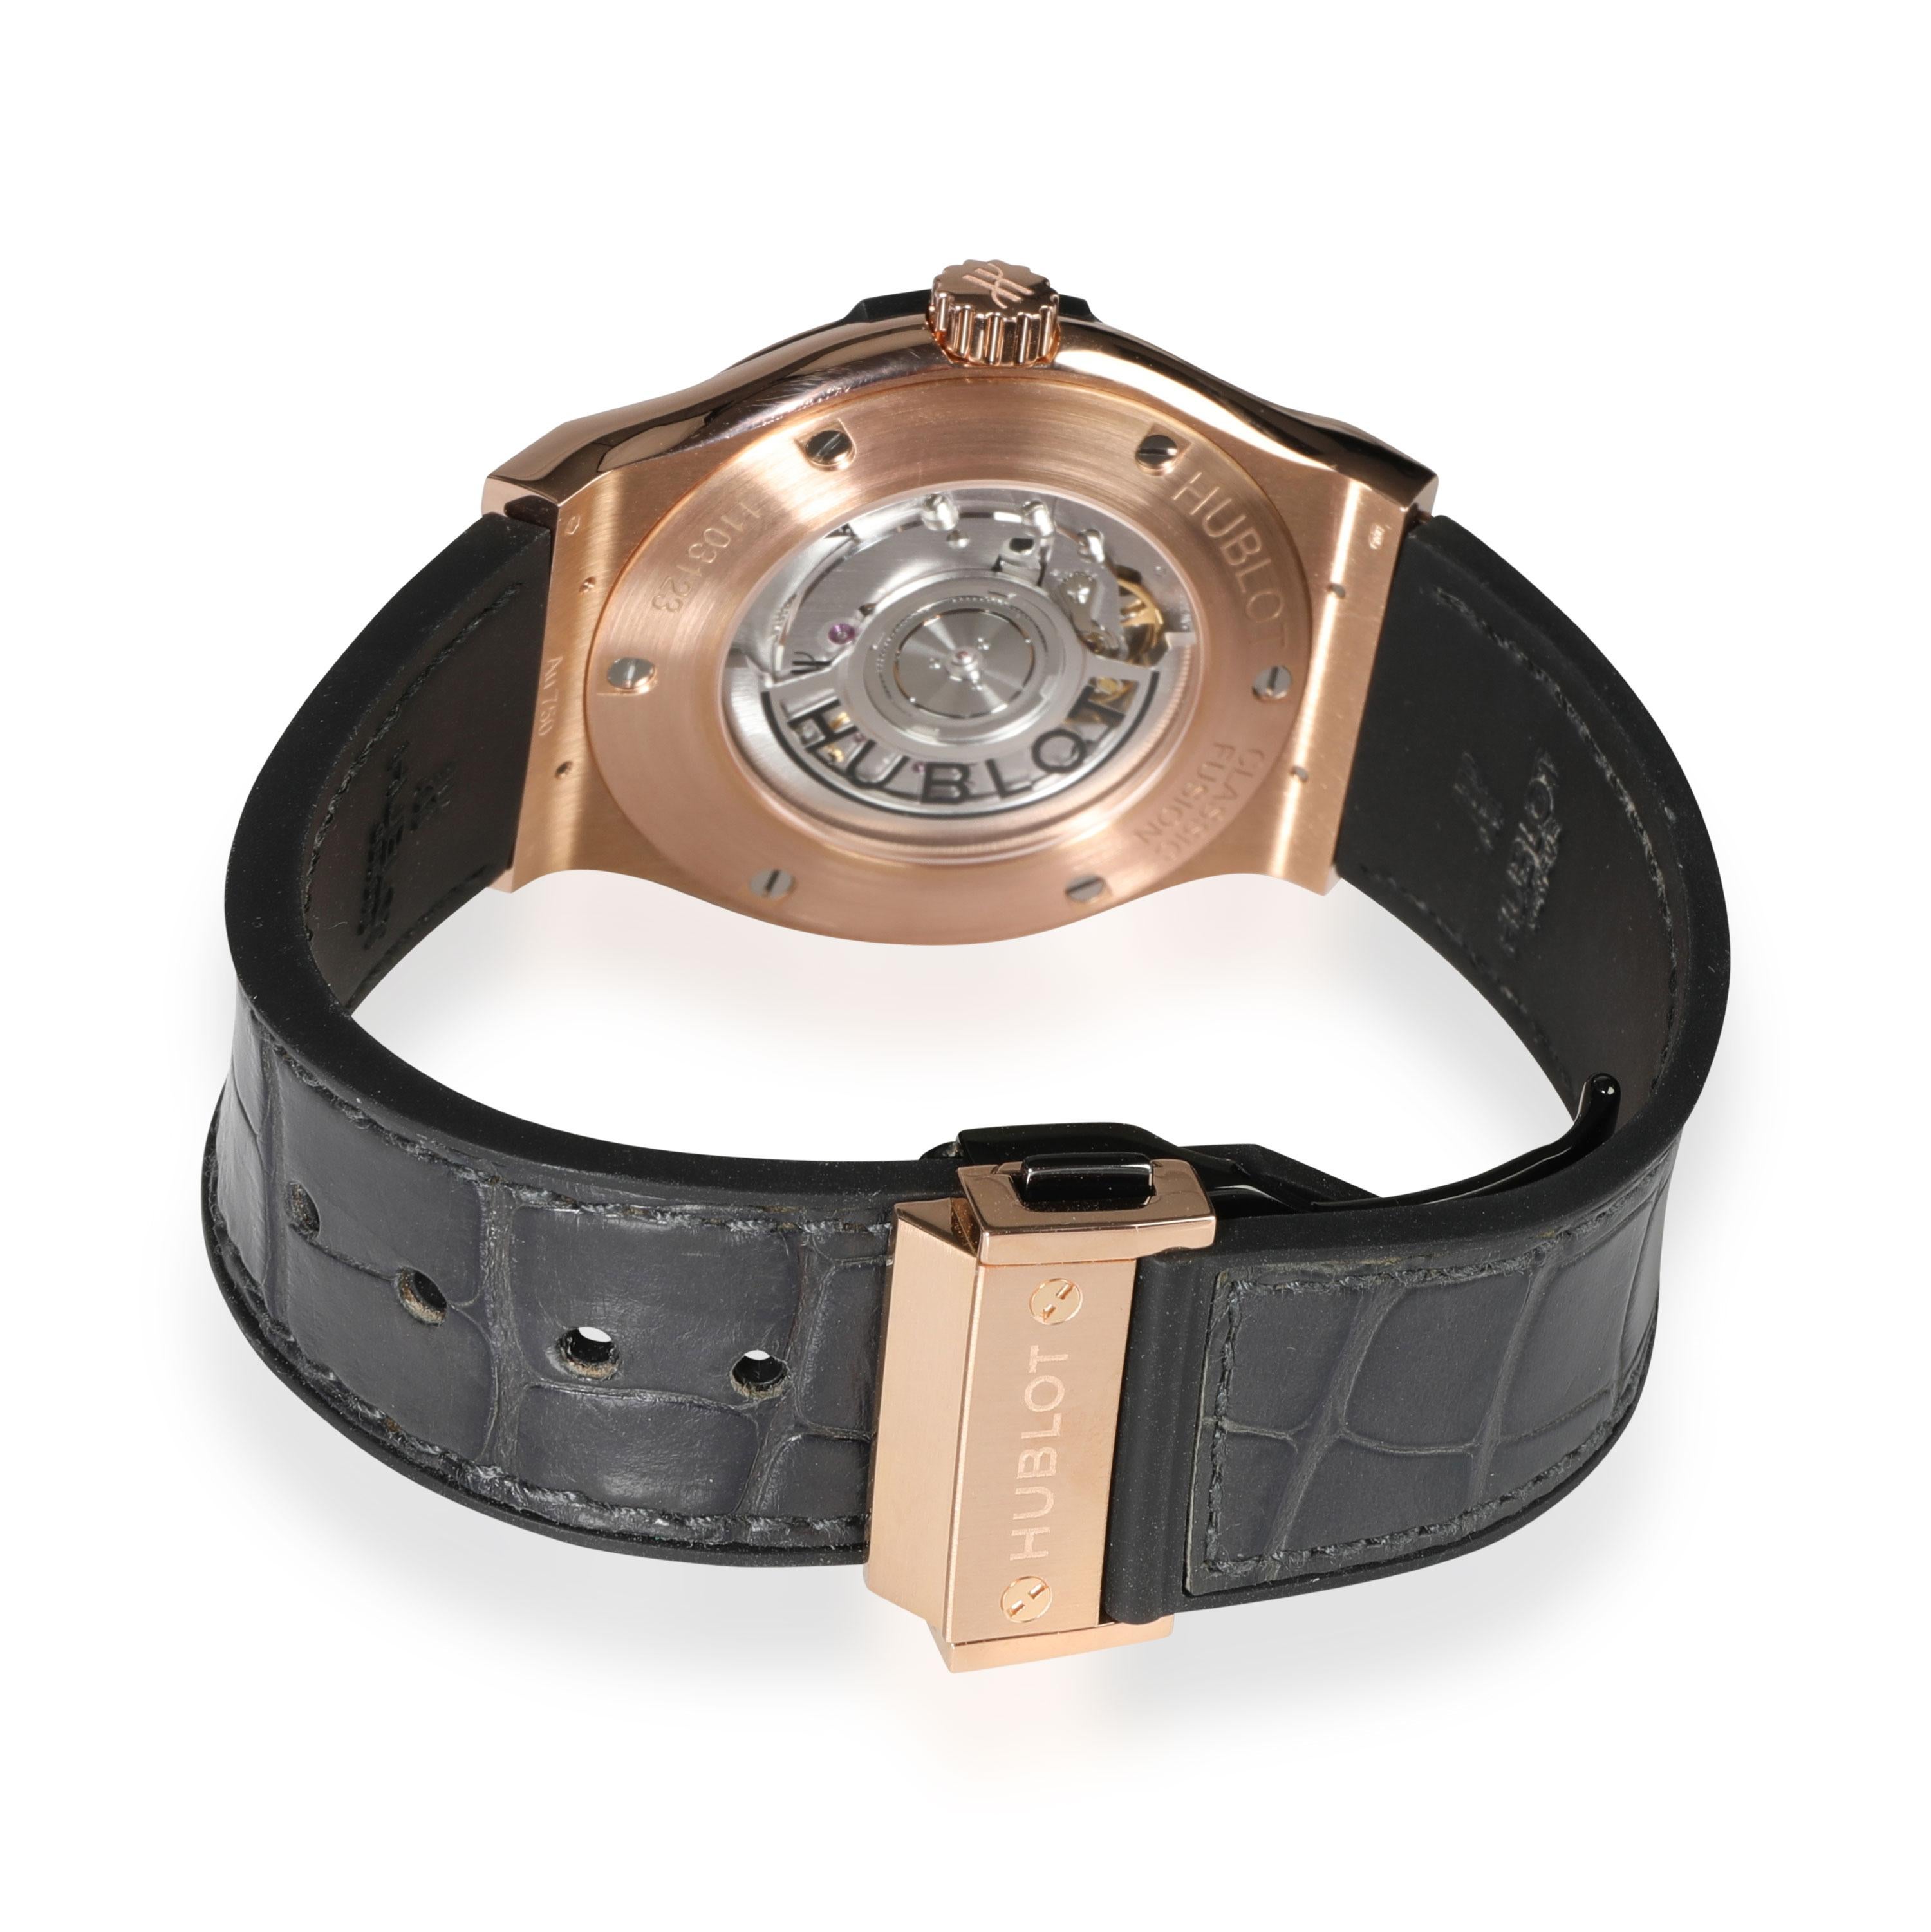 
Hublot Classic Fusion Racing Gray 542.OX.7081.LR Men's Watch in 18kt Rose Gold

SKU: 113049

PRIMARY DETAILS
Brand:  Hublot
Model: Classic Fusion Racing Gray
Country of Origin: Switzerland
Movement Type: Mechanical: Automatic/Kinetic
Year